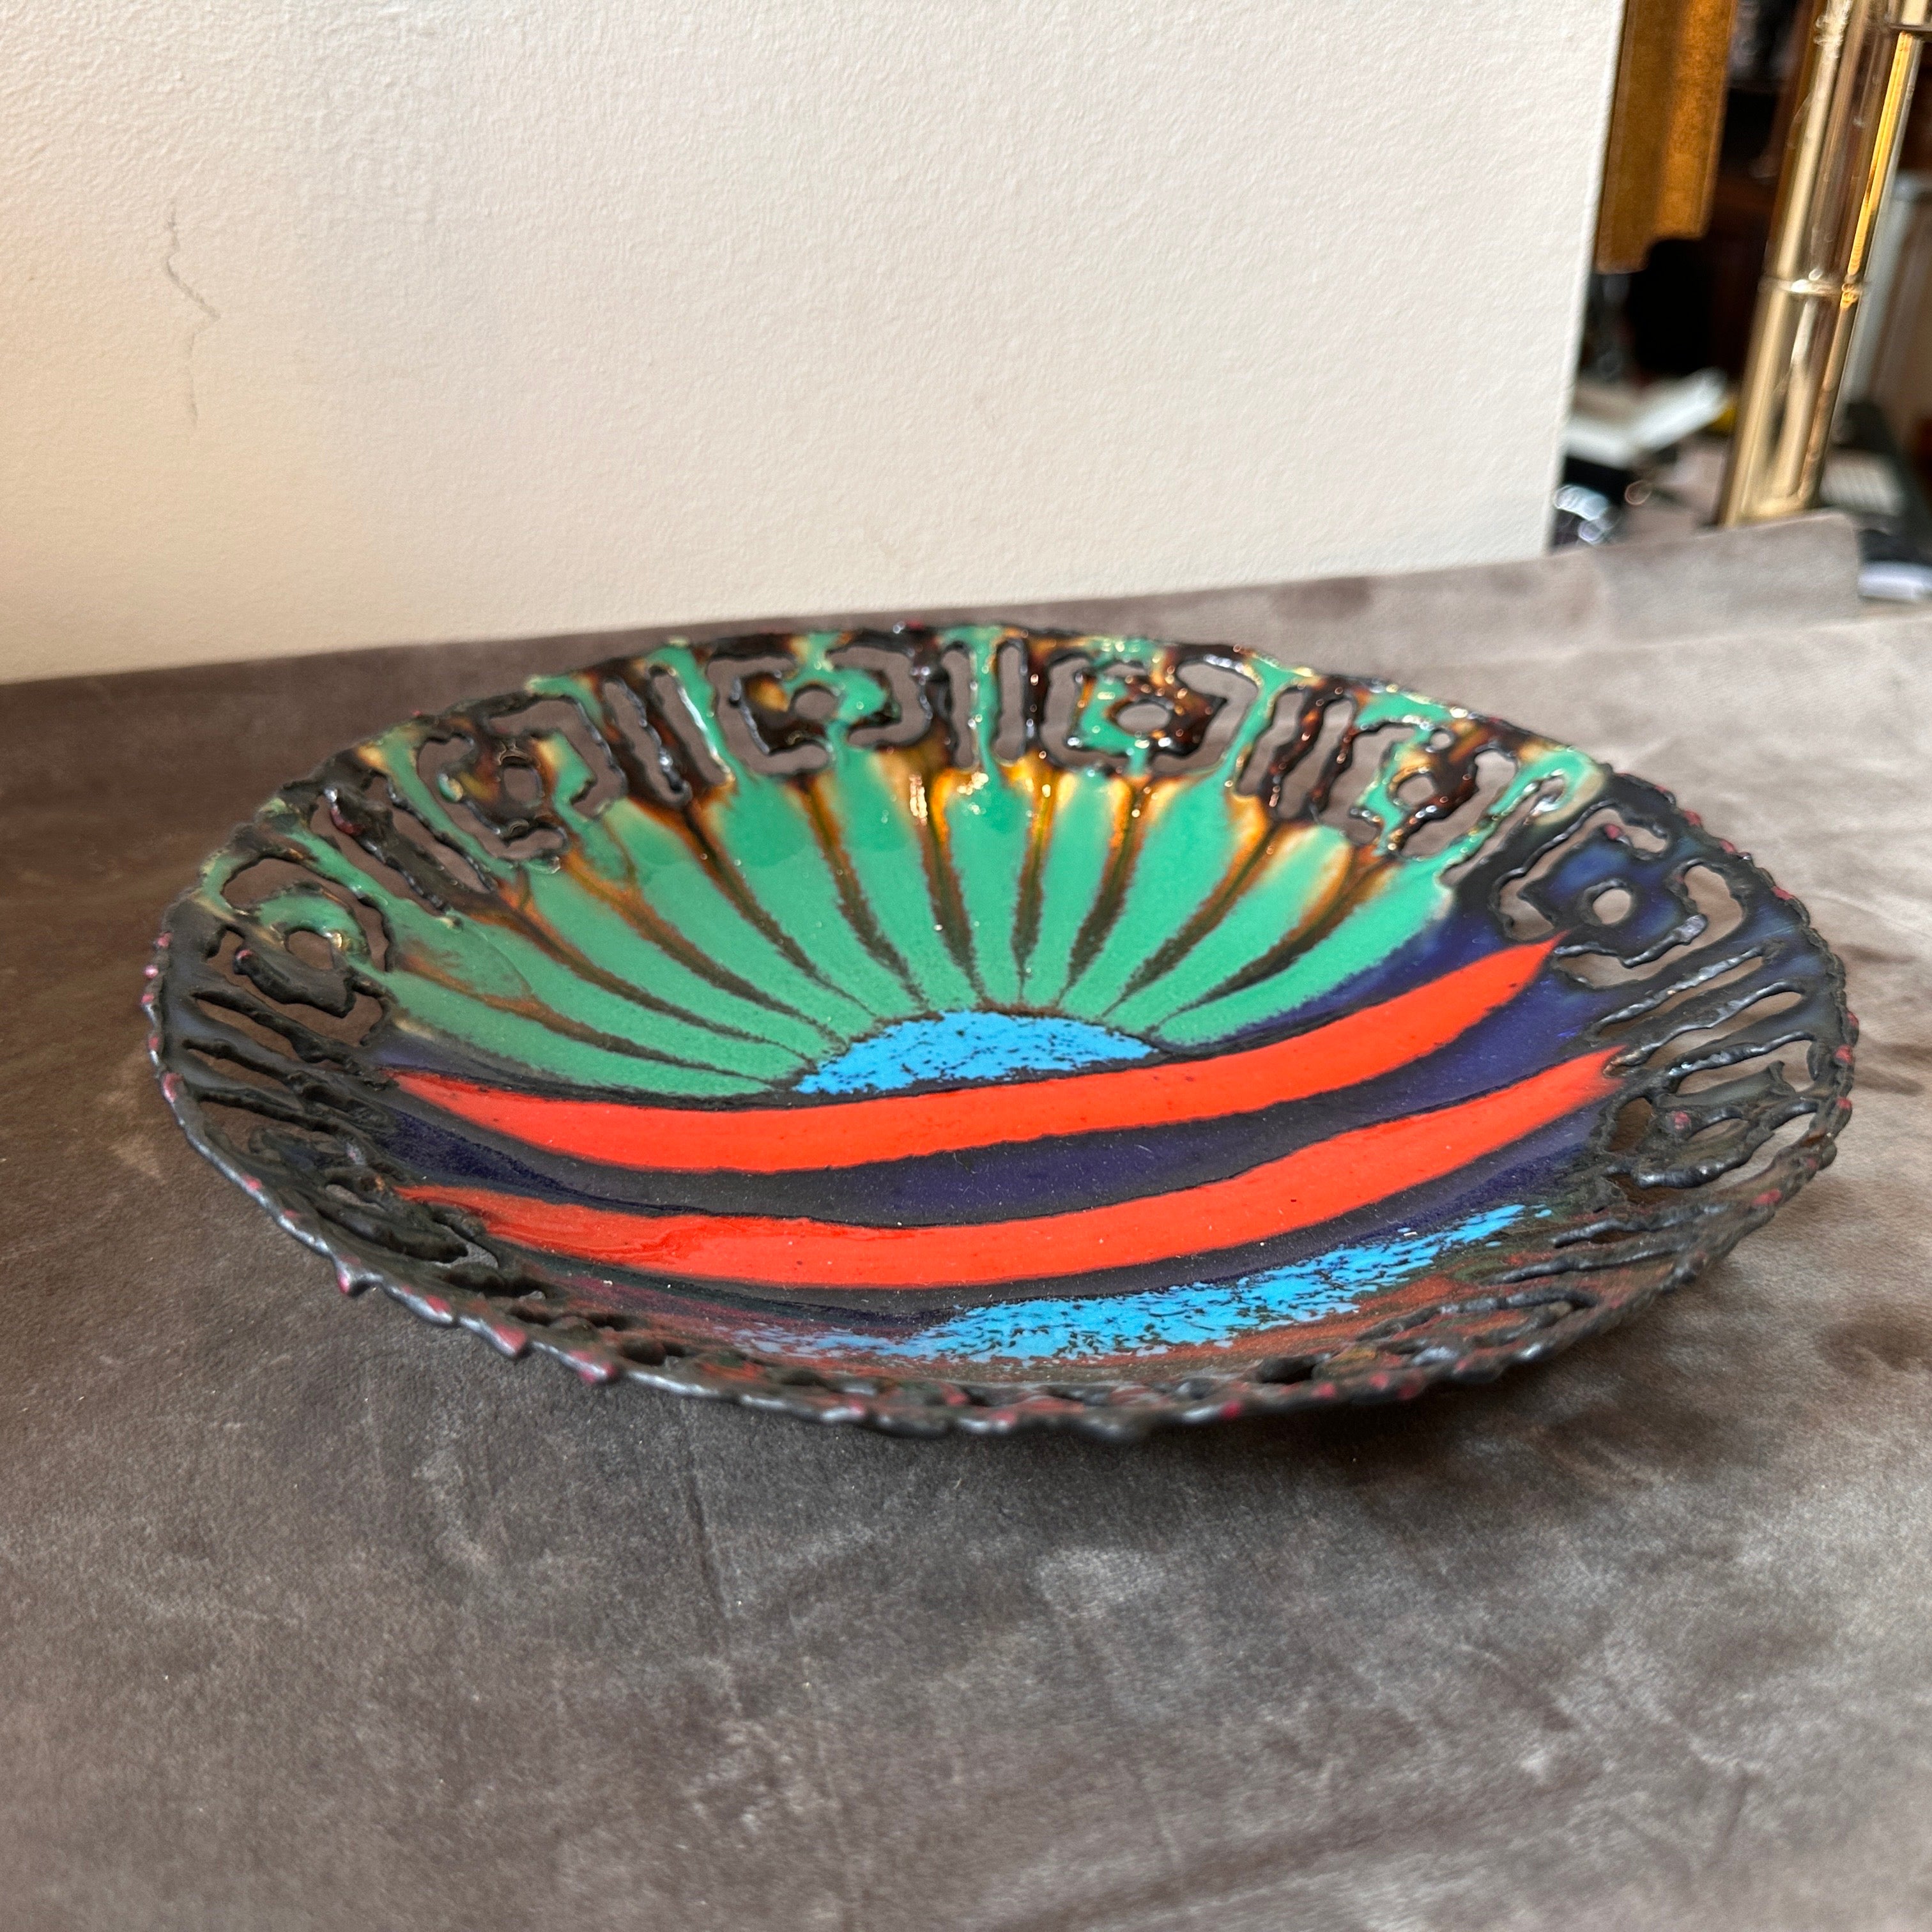 This Copper Round Bowl is a stunning example of Italian craftsmanship and mid-century design sensibilities, it embodies the era's fascination with vibrant colors and abstract decors.
Crafted from copper, the bowl features a round shape that allows